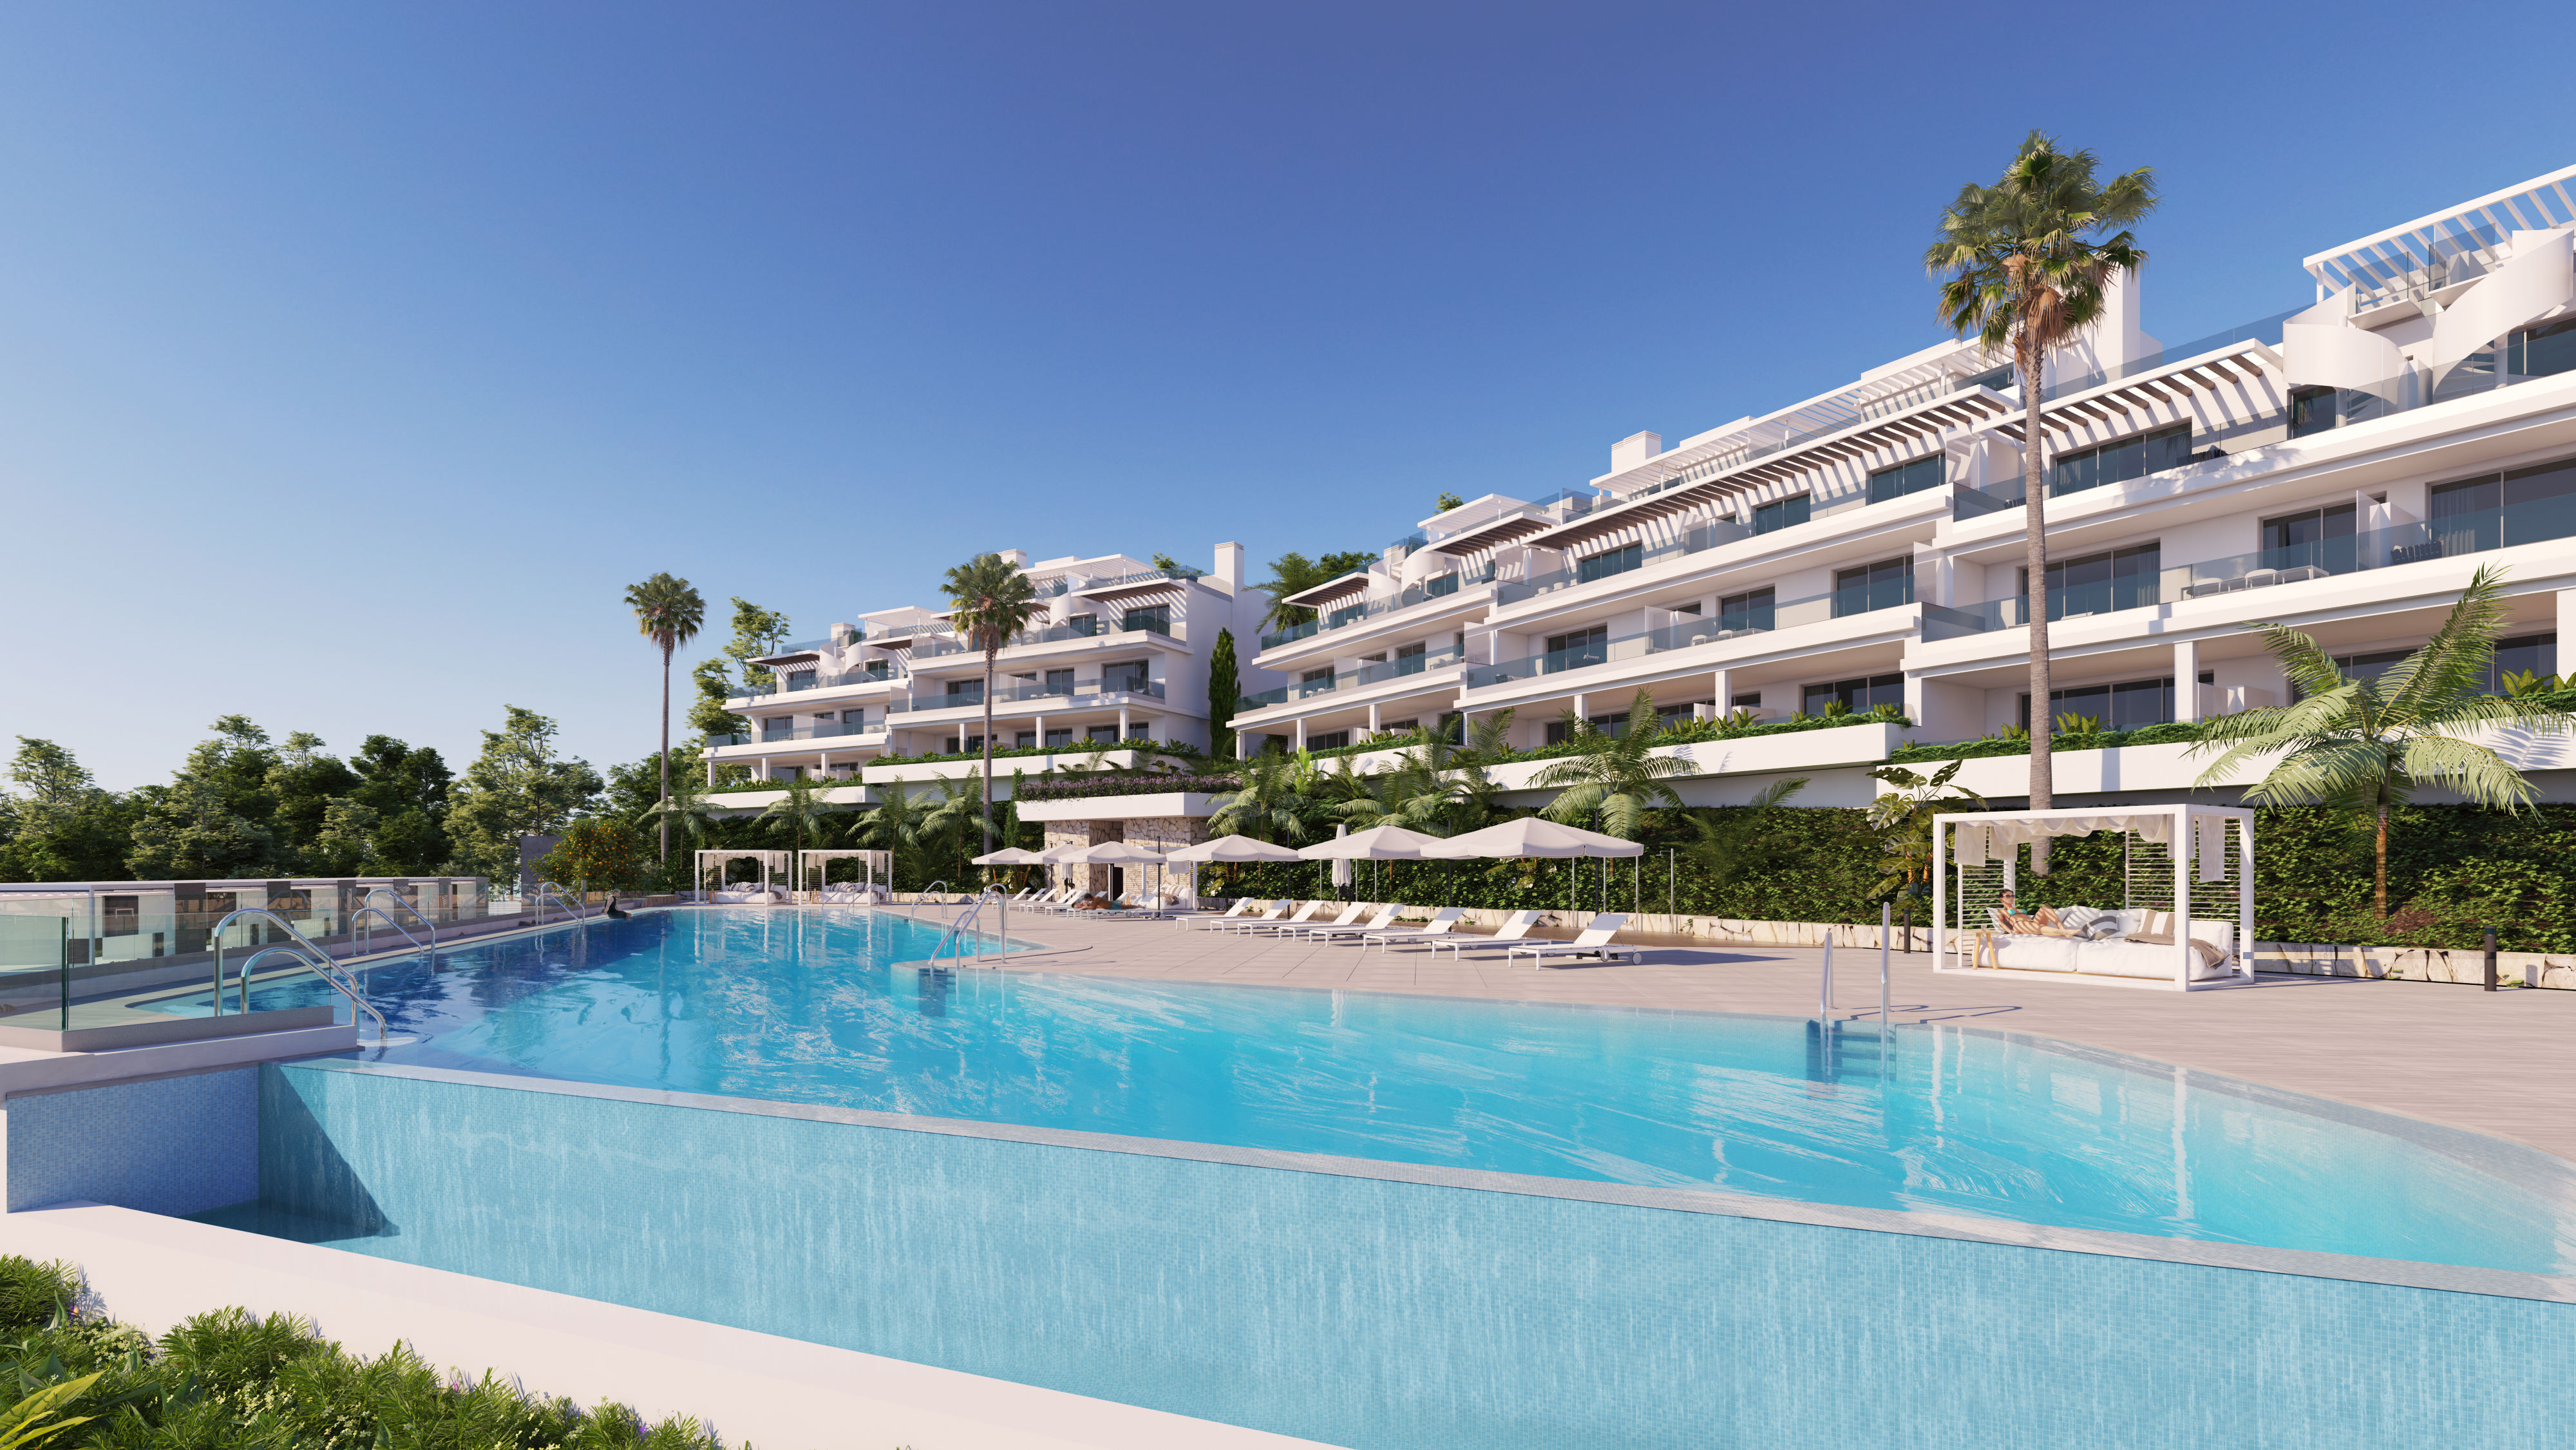 Apartments with sea views on the Golden Mile of Estepona